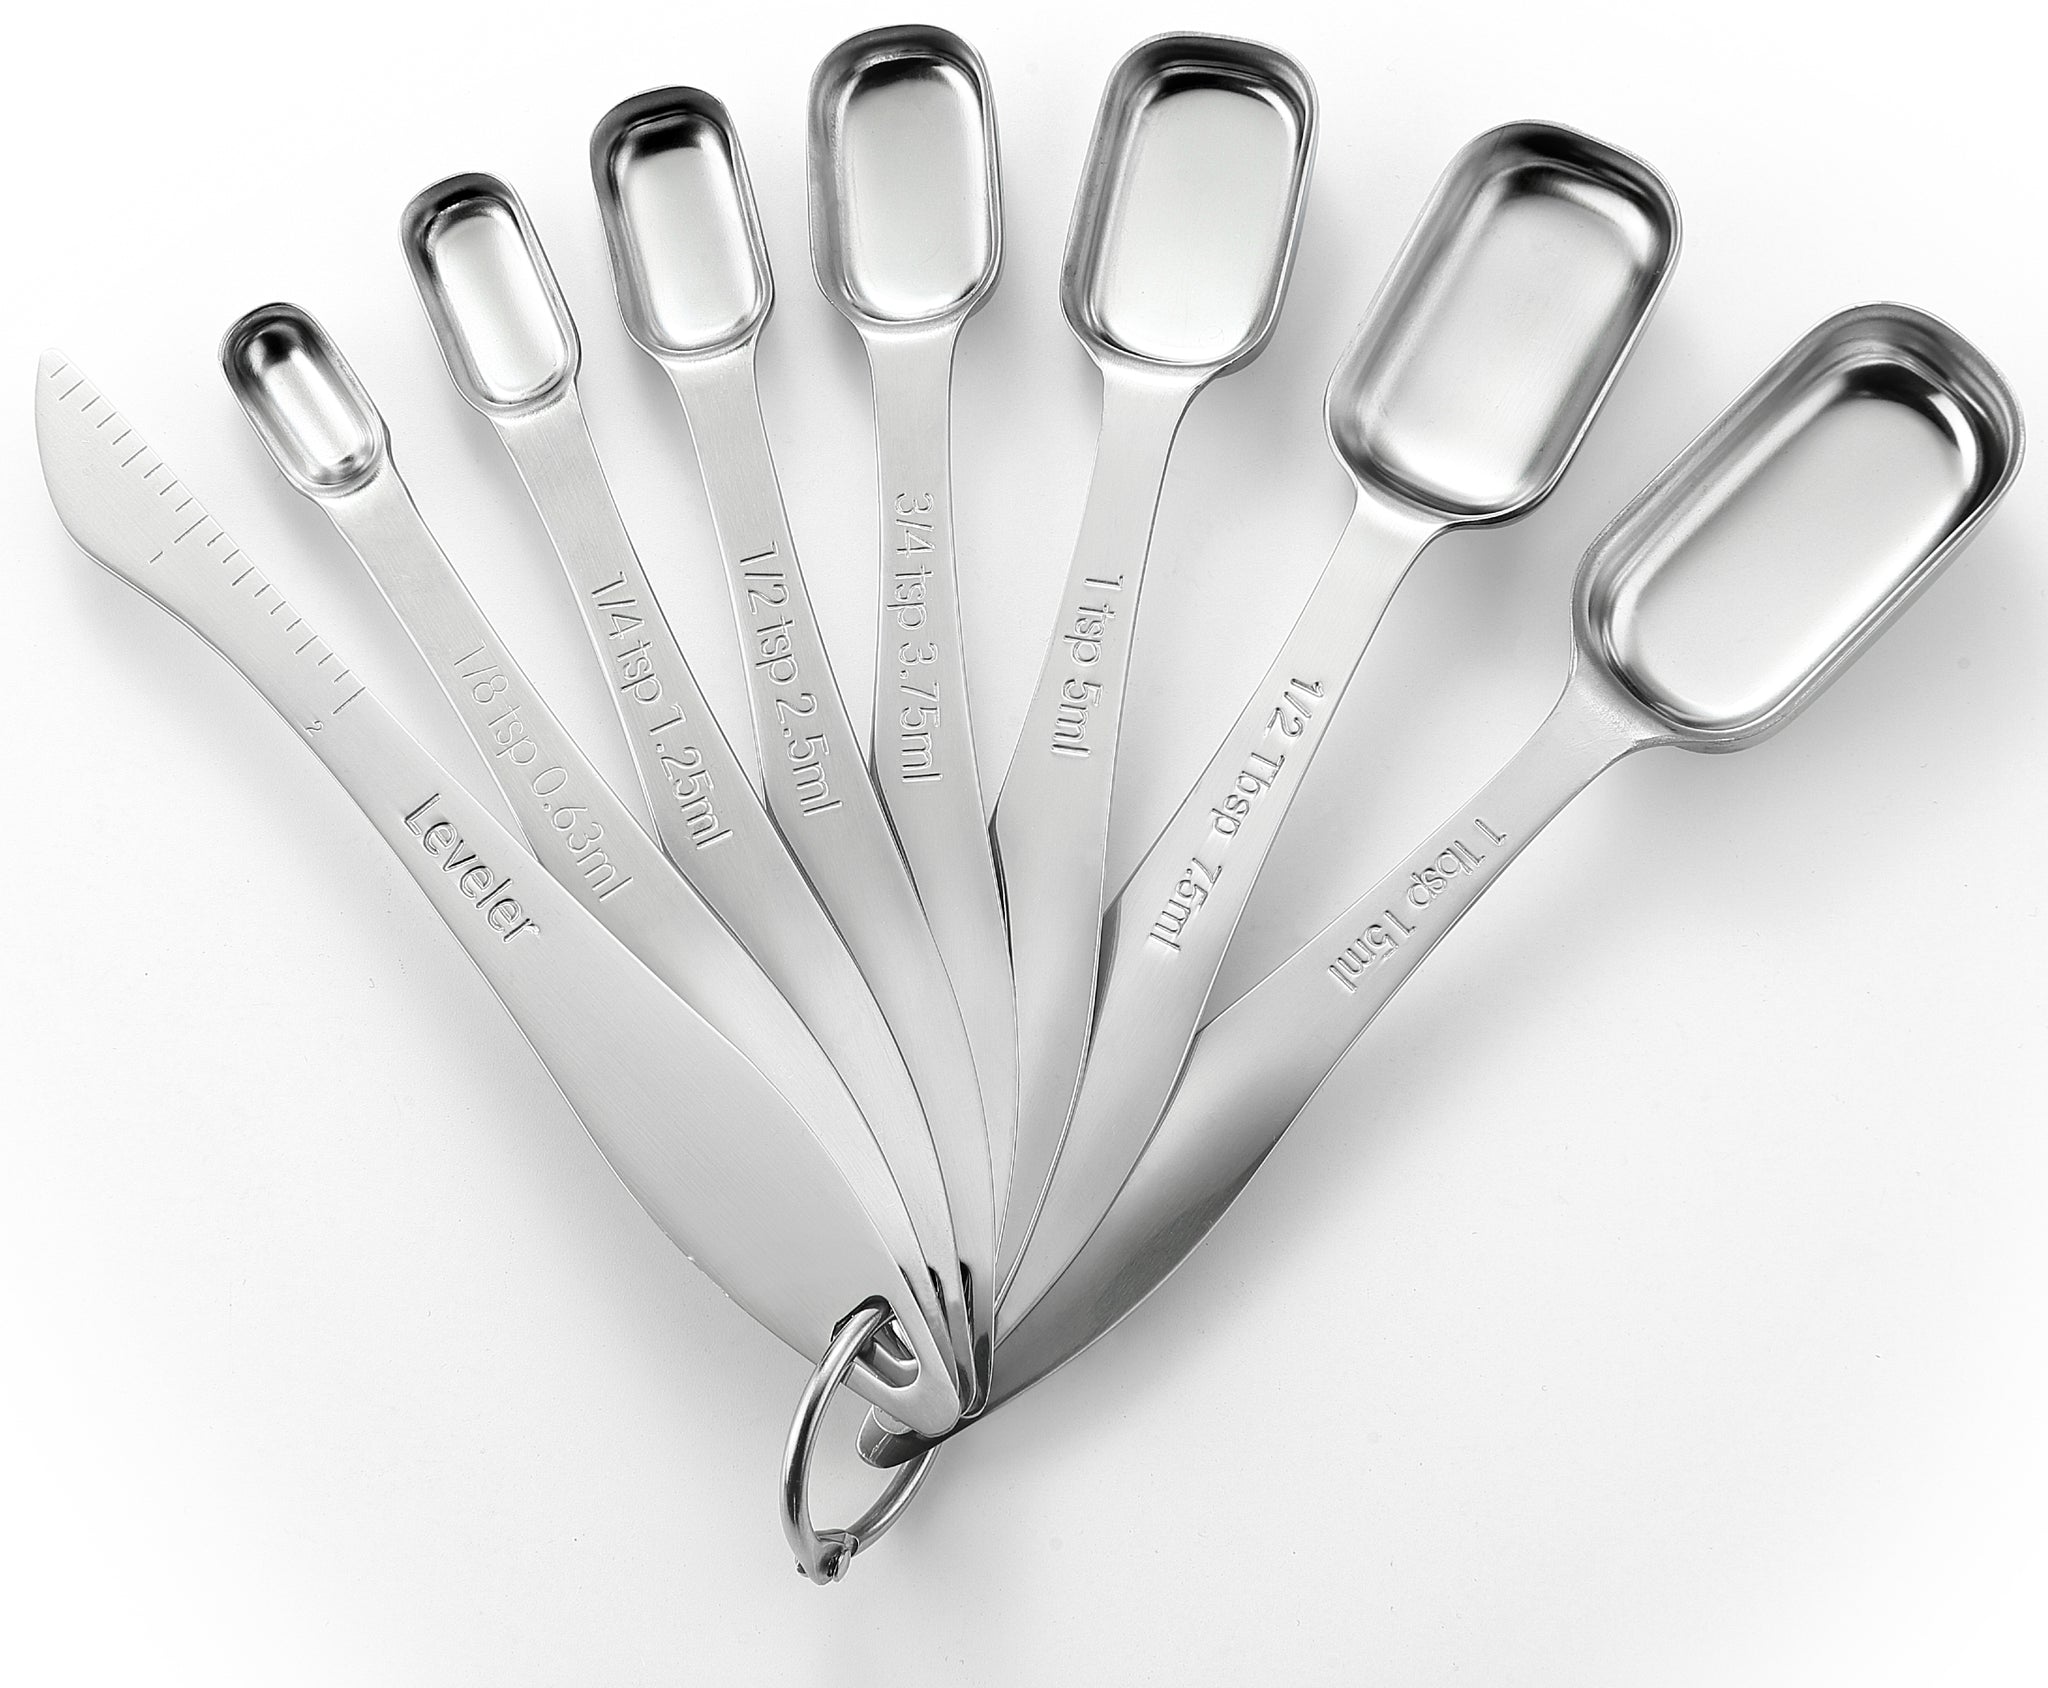 Upgrade Stainless Steel Measuring Spoons Set, Small Tablespoon, Teaspoons,  Set 6 with Bonus Leveler, Etched Markings and Removable Clasp for Dry and